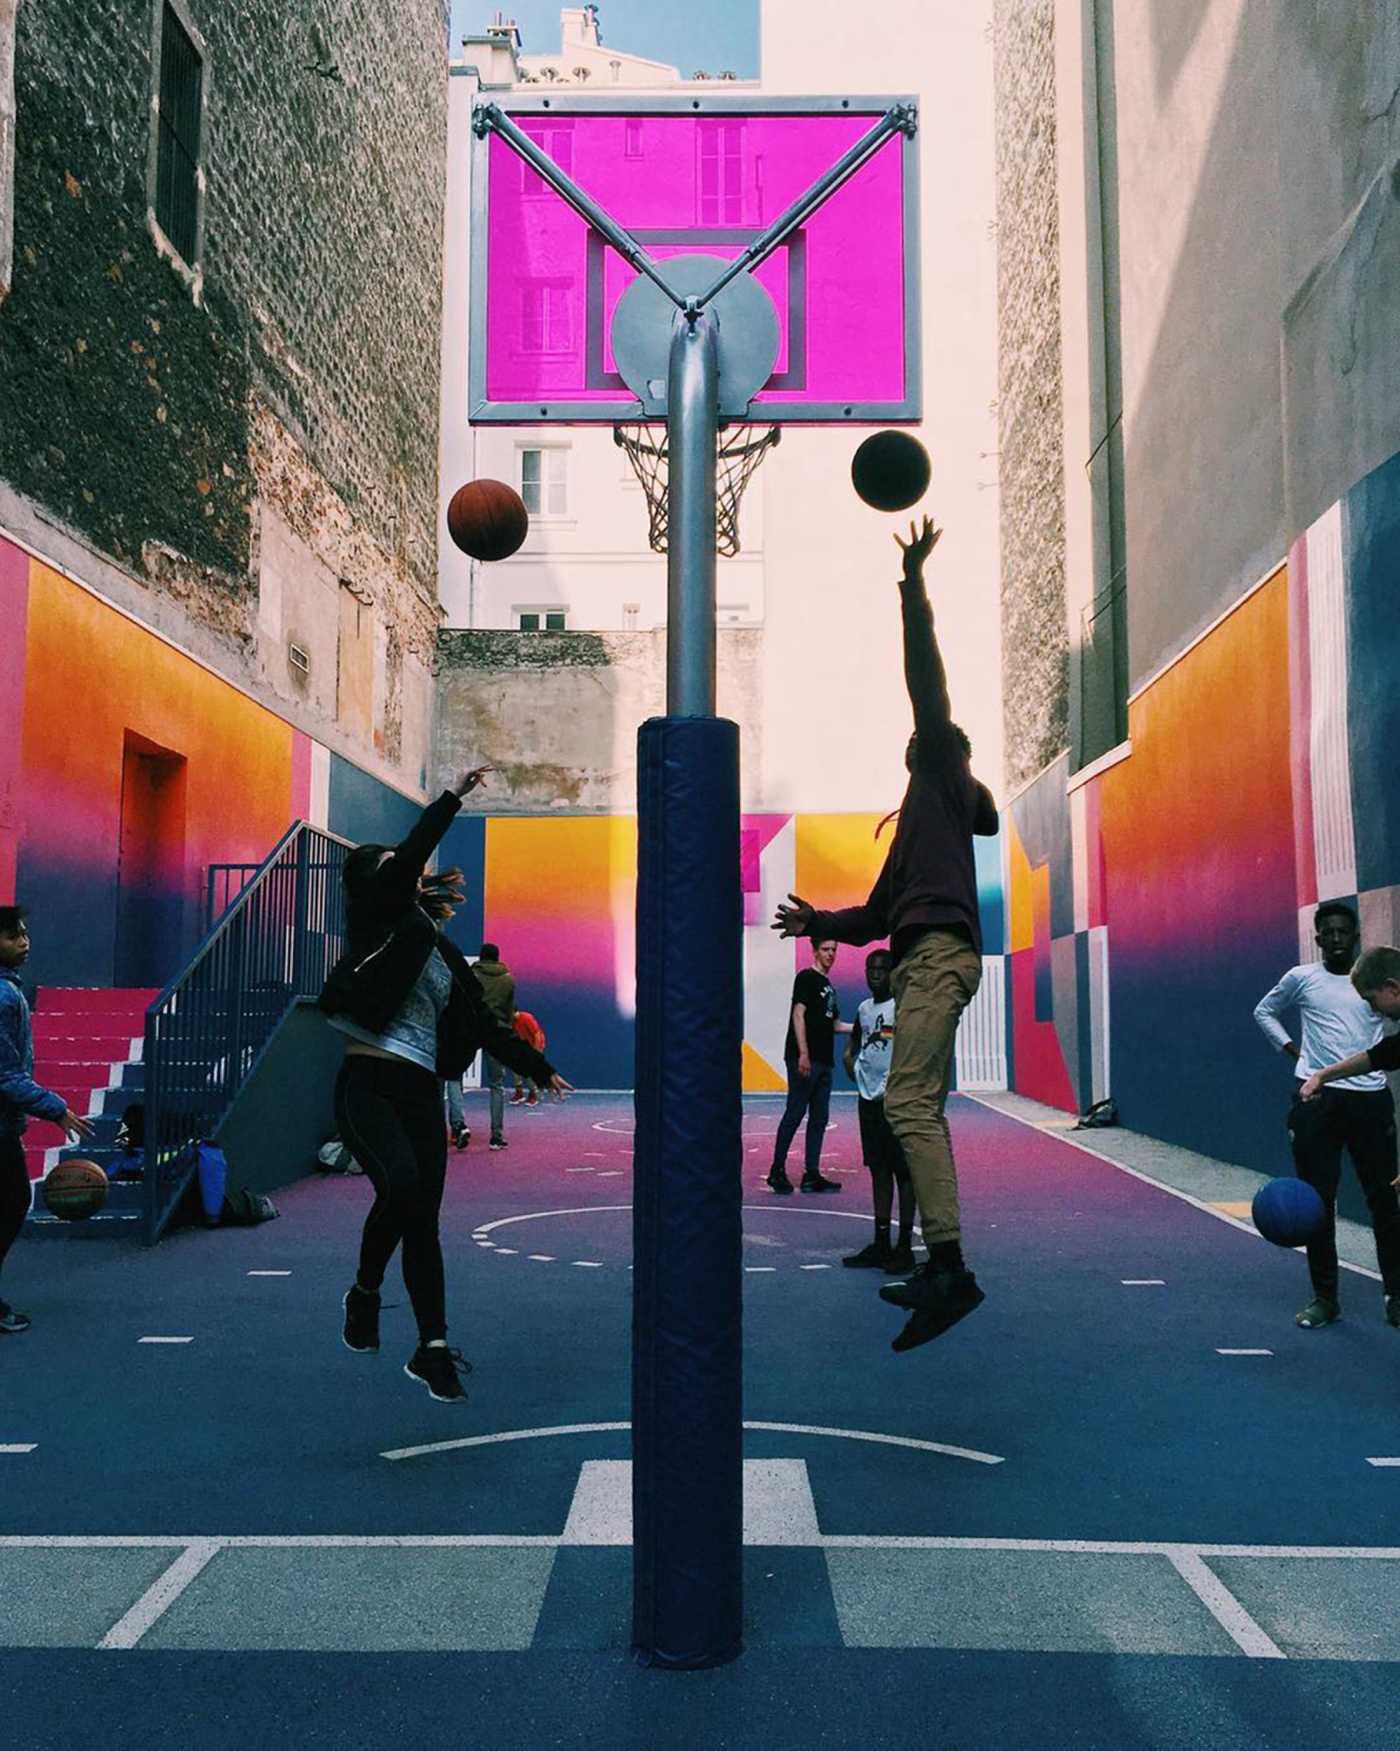 Two people jump to score a basket in an outdoor basketball court against a colorful background